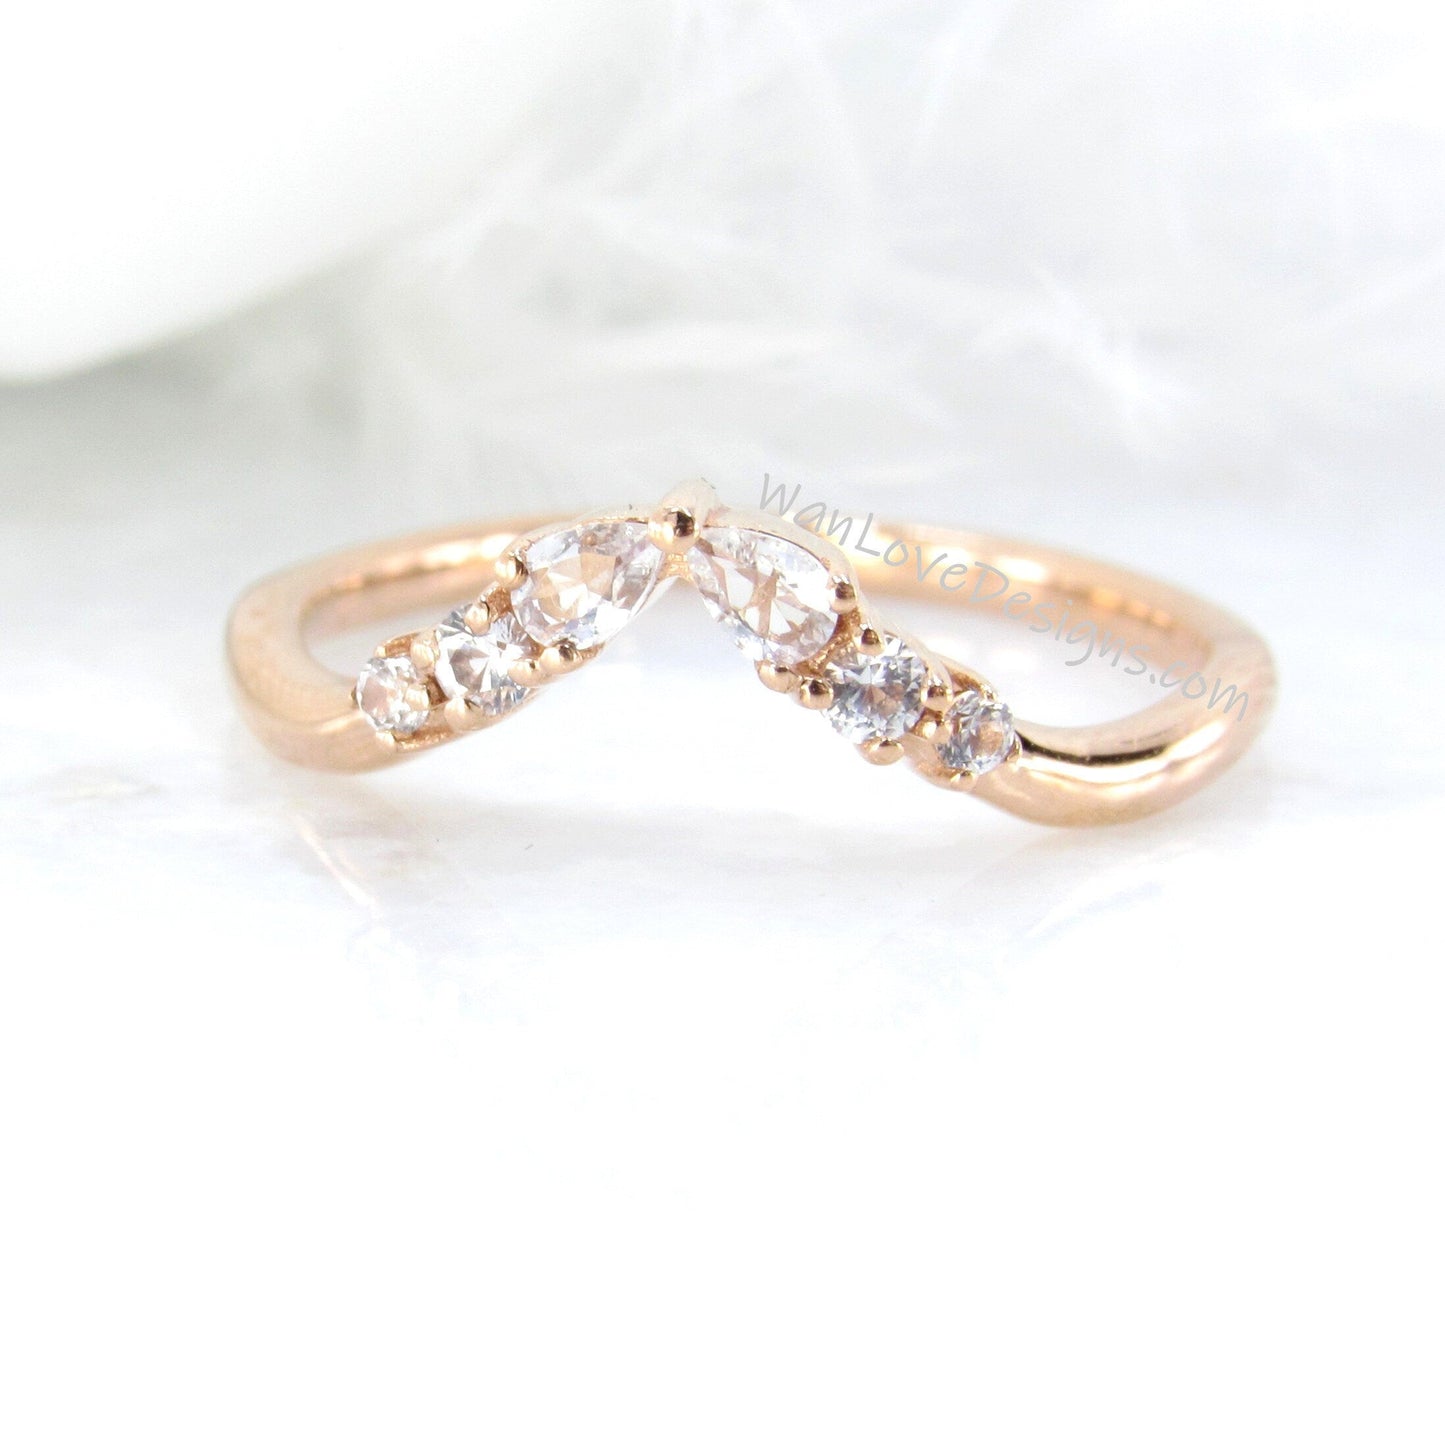 Diamond Contoured Bands/ 14K Solid Gold Band/Art Deco Moissanite Wedding Band/ Matching Band/ Stacking Ring/ Birthstone Rings/ Mom Rings Wan Love Designs